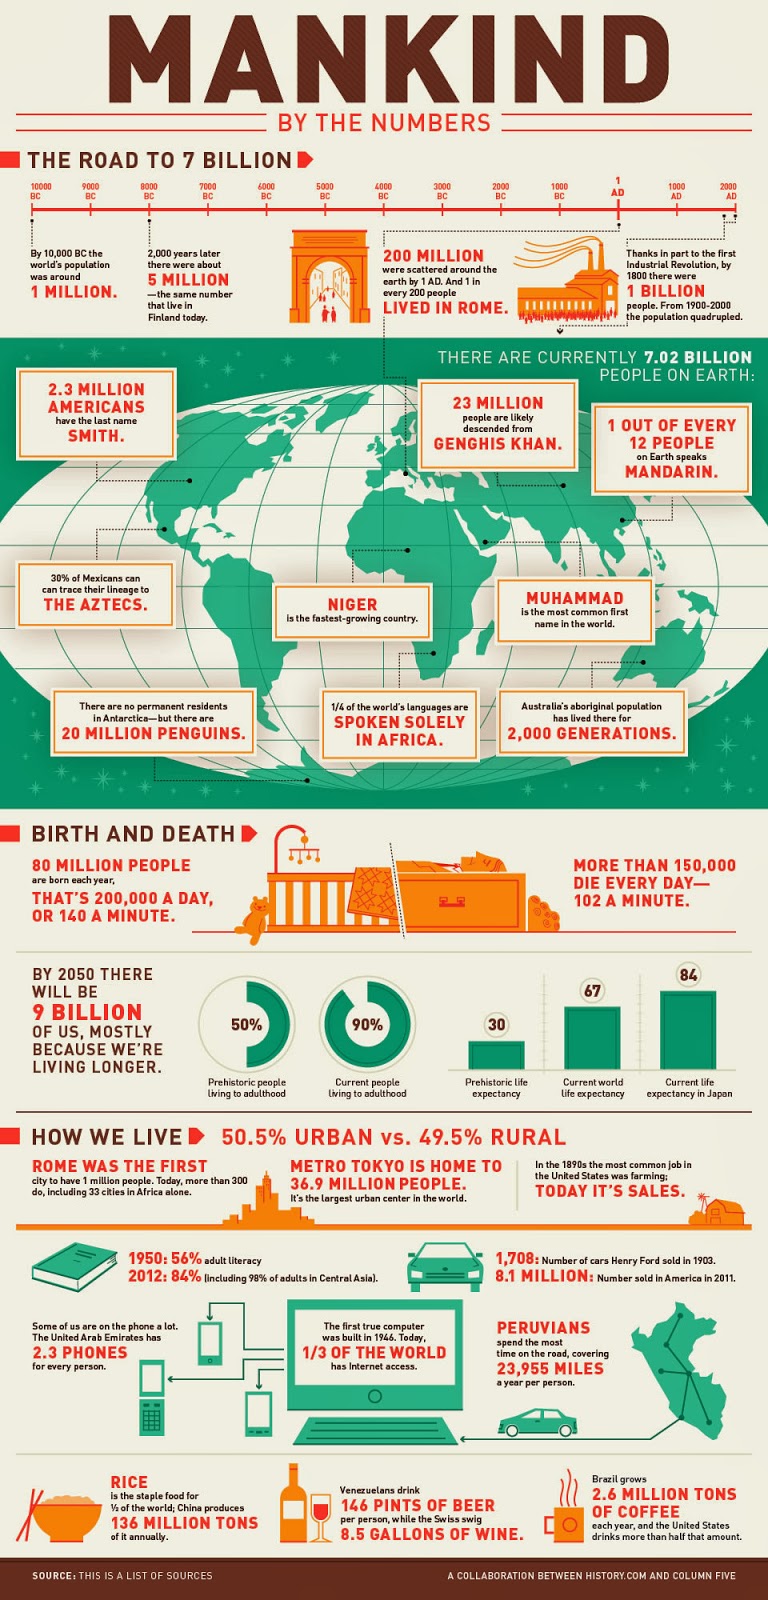 http://3.bp.blogspot.com/-MAE1qlROvCw/Uxqr0UxfqeI/AAAAAAAAmis/tS0e5wKGrDE/s1600/Mankind-By-the-Numbers-Infographic.jpg